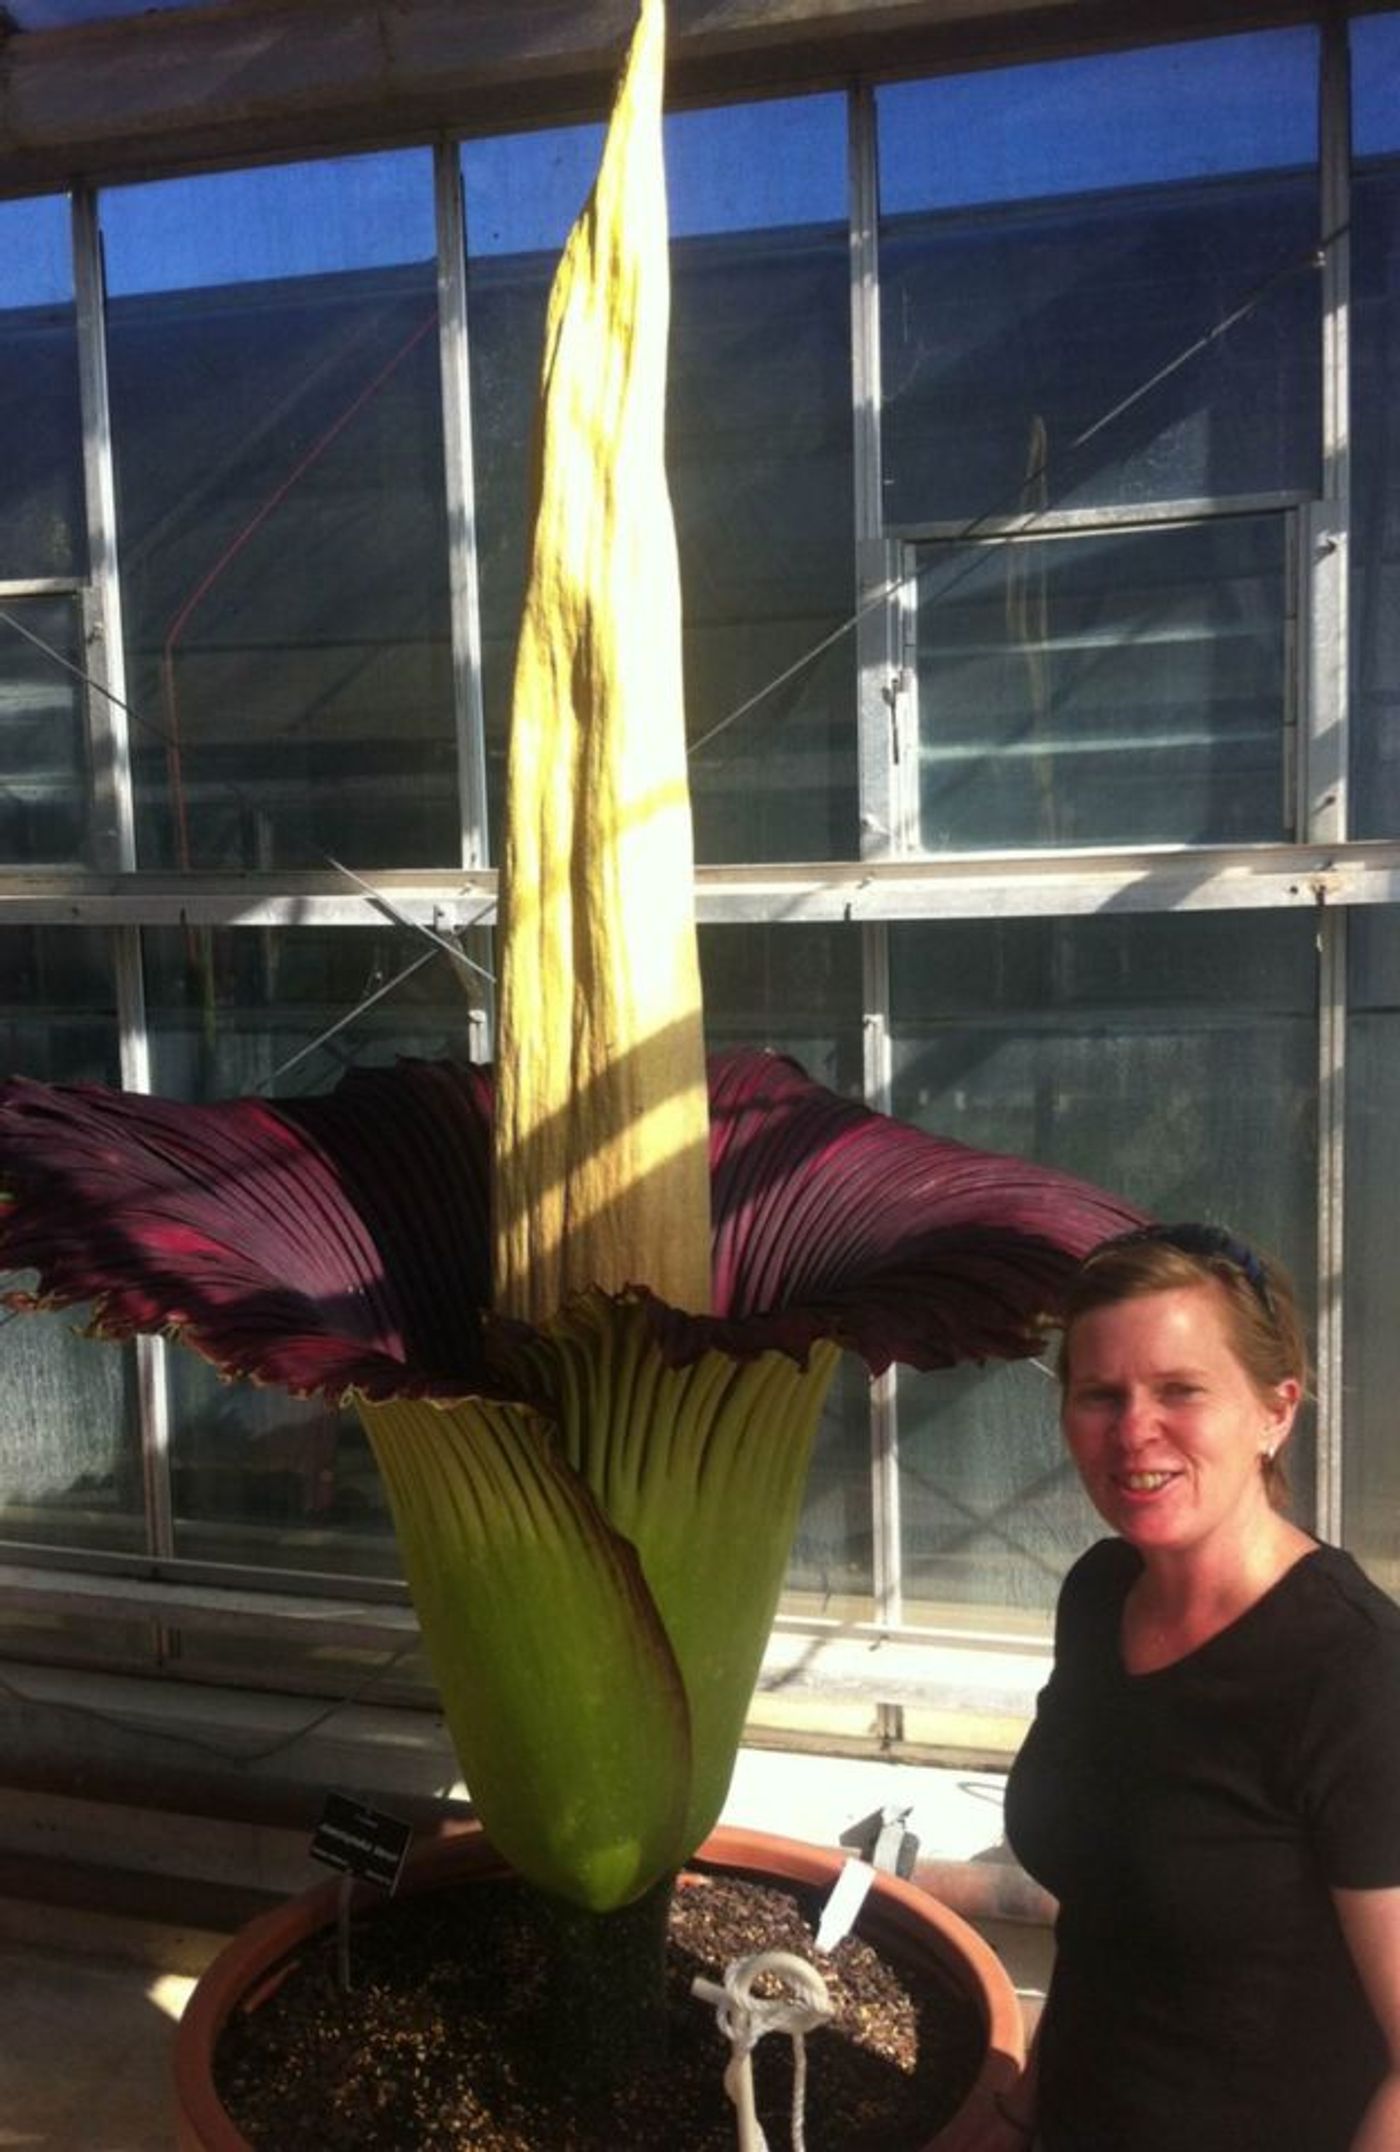 The Australian corpse flower bloomed on Monday, and smelled terrible.